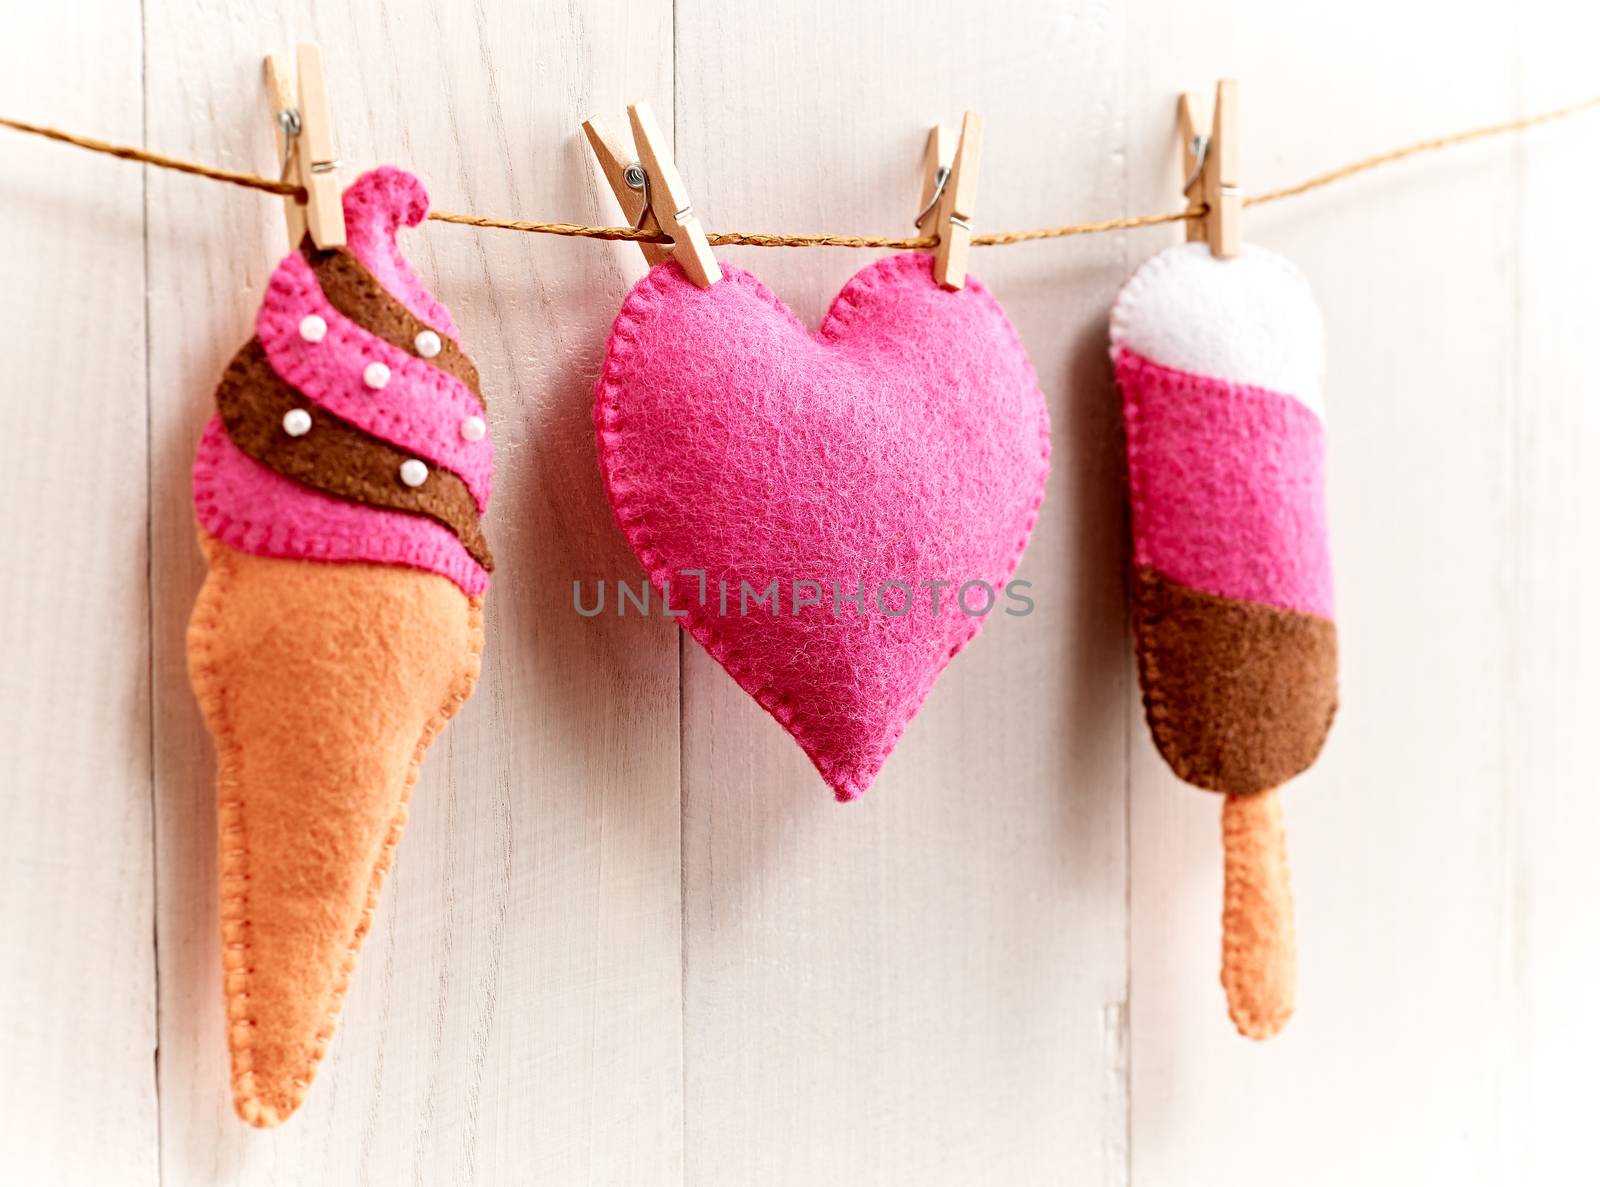 Love, Valentines Day. Heart and couple sweet ice cream, Handmade, hanging on rope. Vintage romantic style, white wooden background, toned. Vivid unusual creative greeting card, multicolored felt